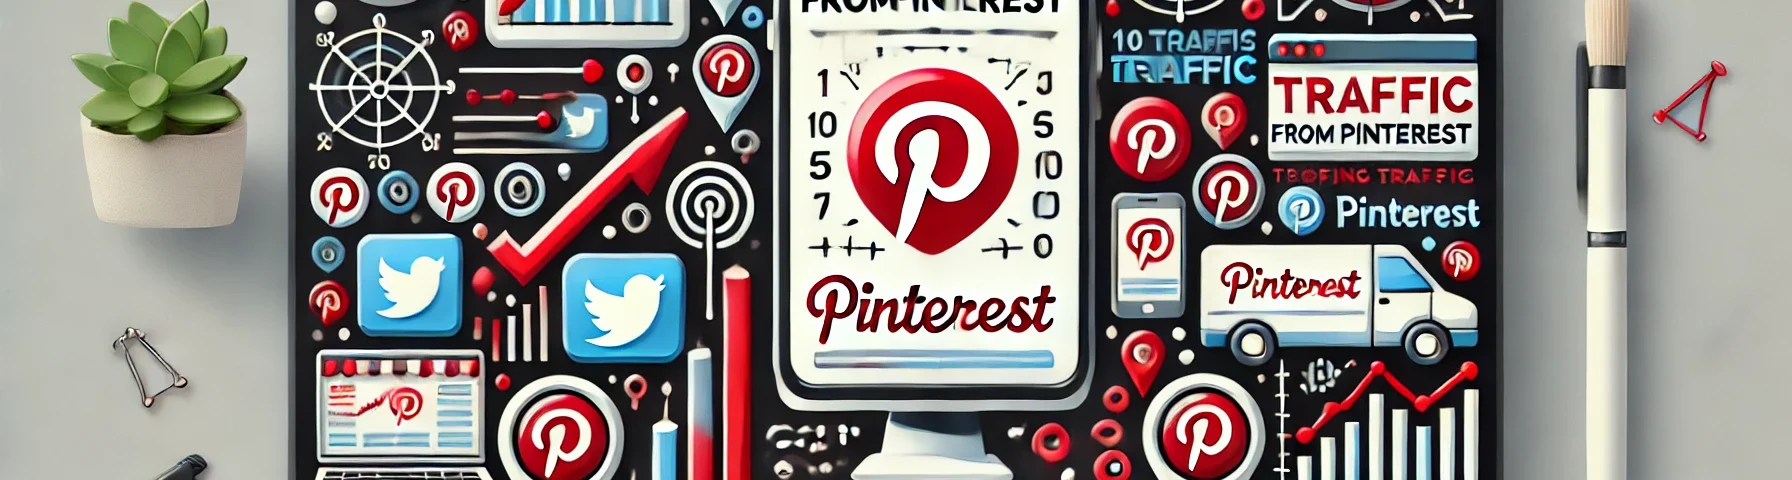 how to Get Traffic from Pinterest